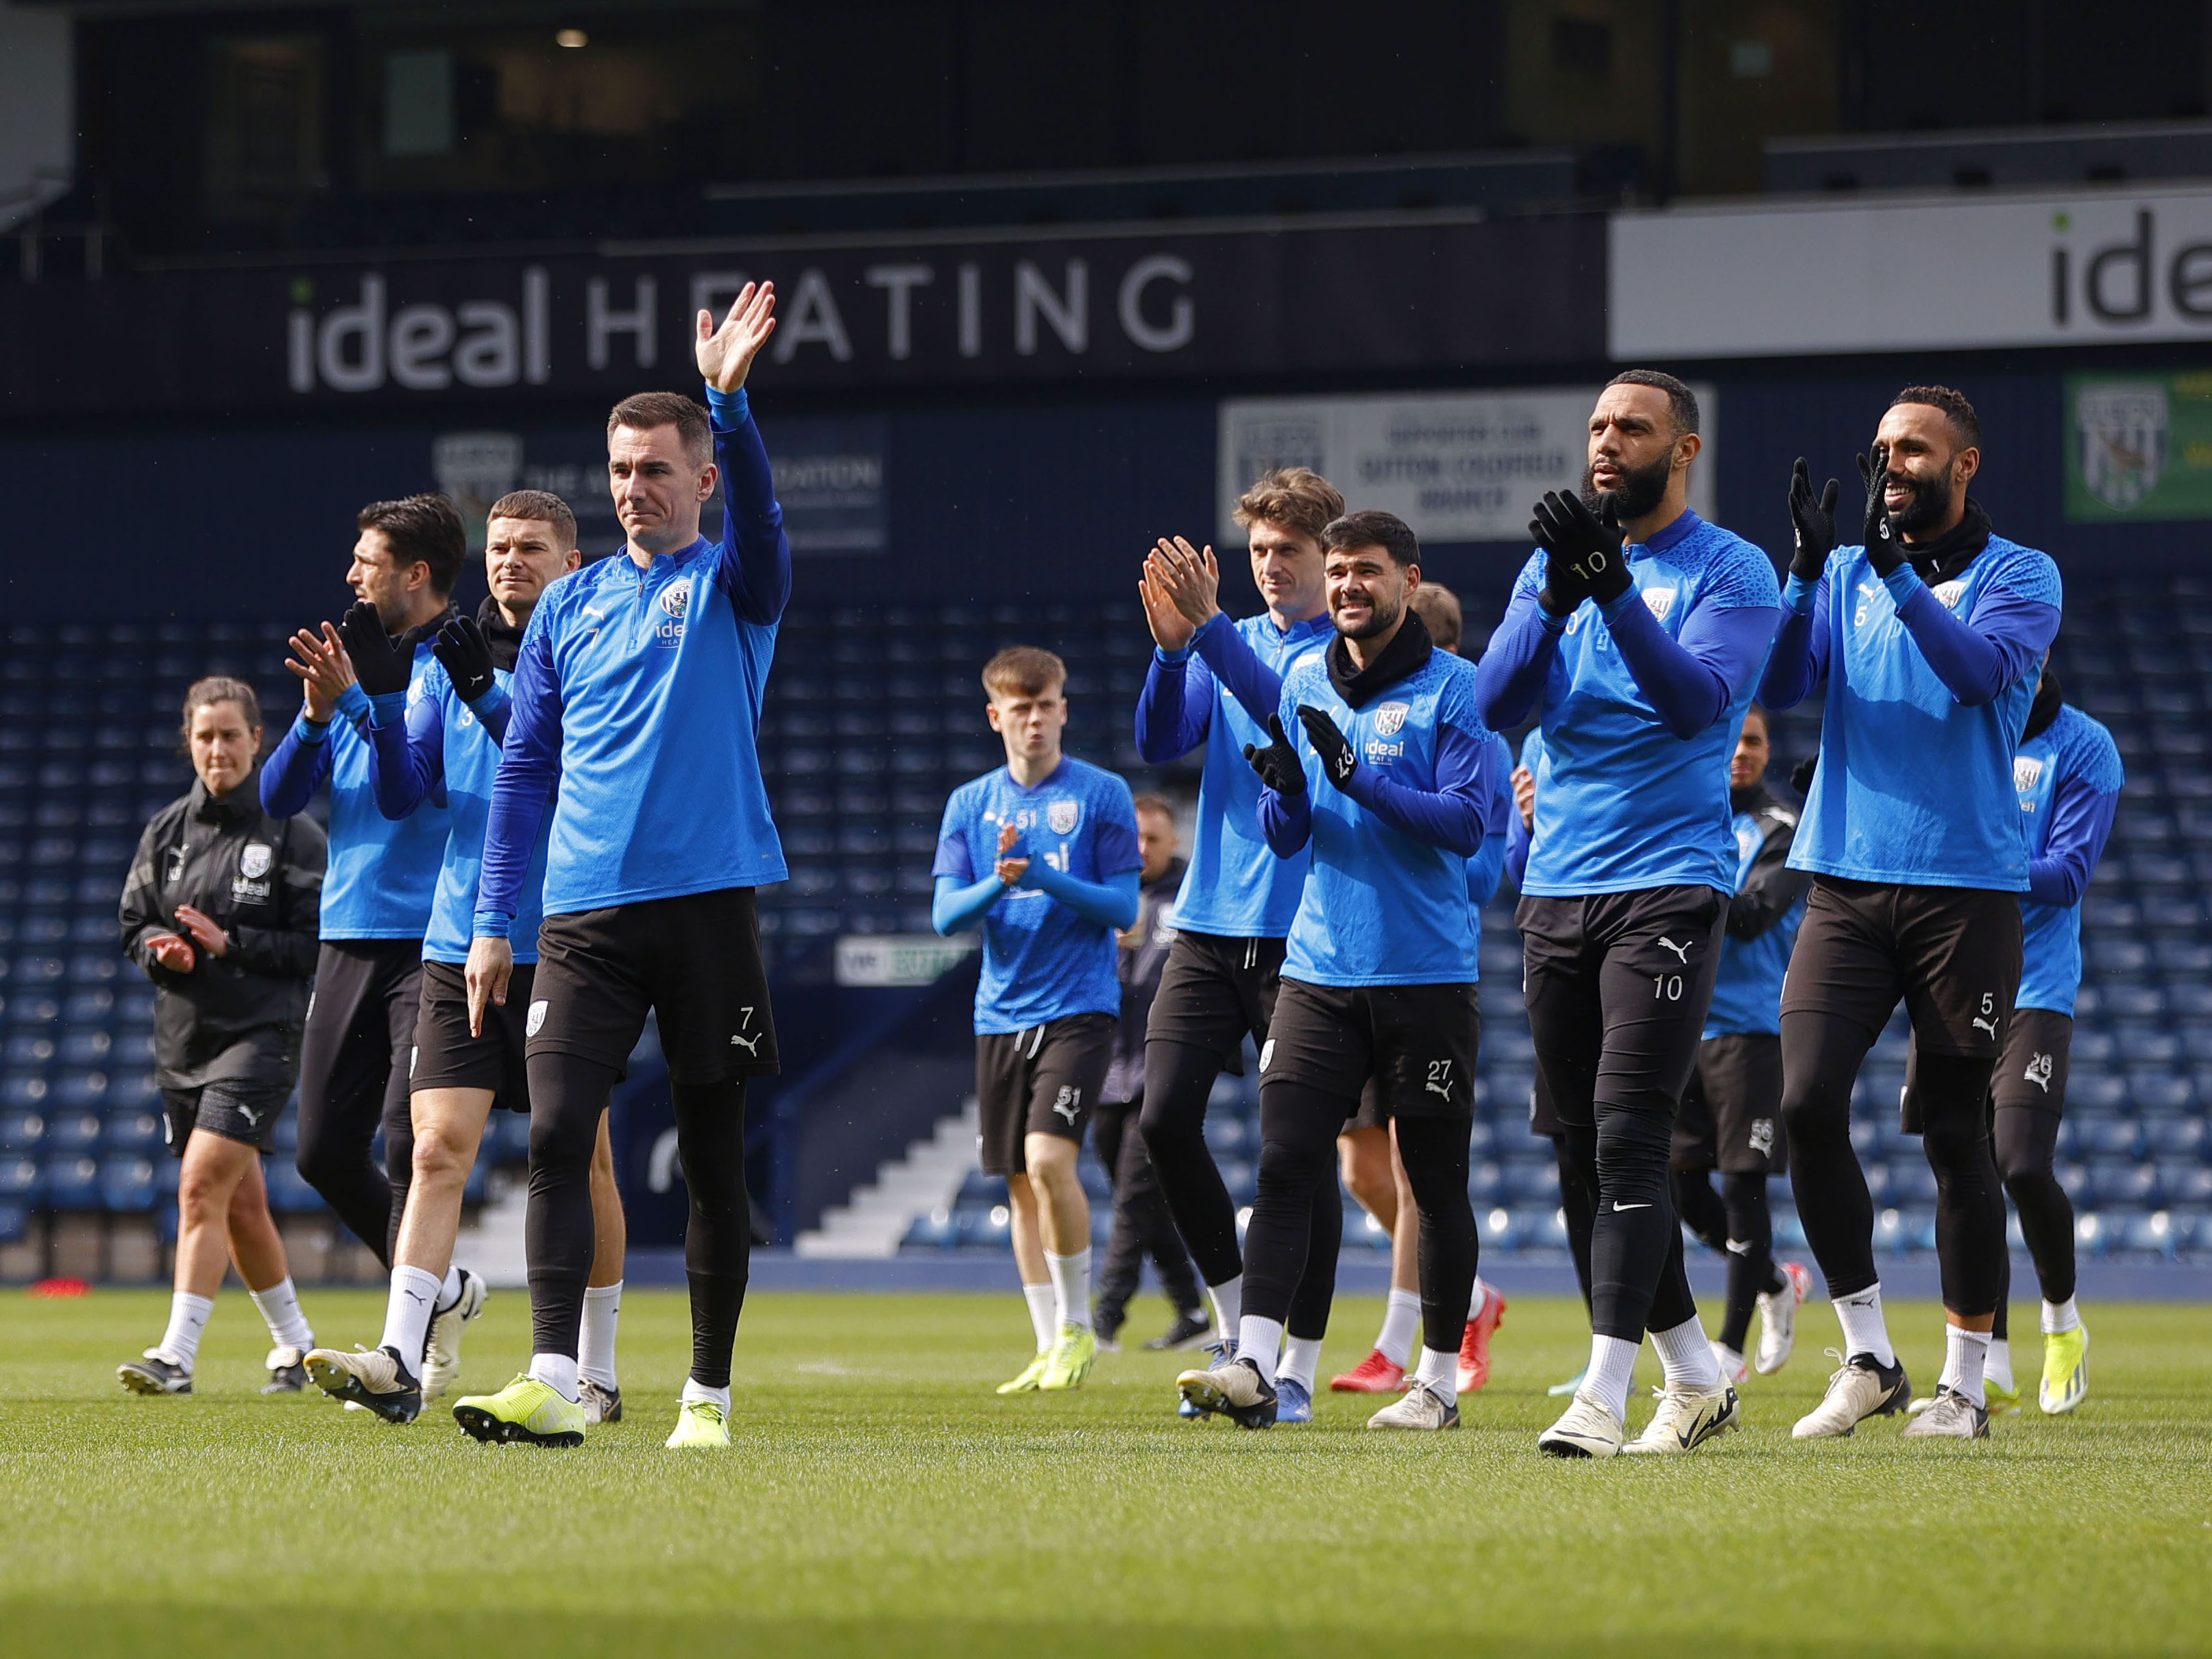 Albion players wave to and applaud Albion fans in the stand during the open training day